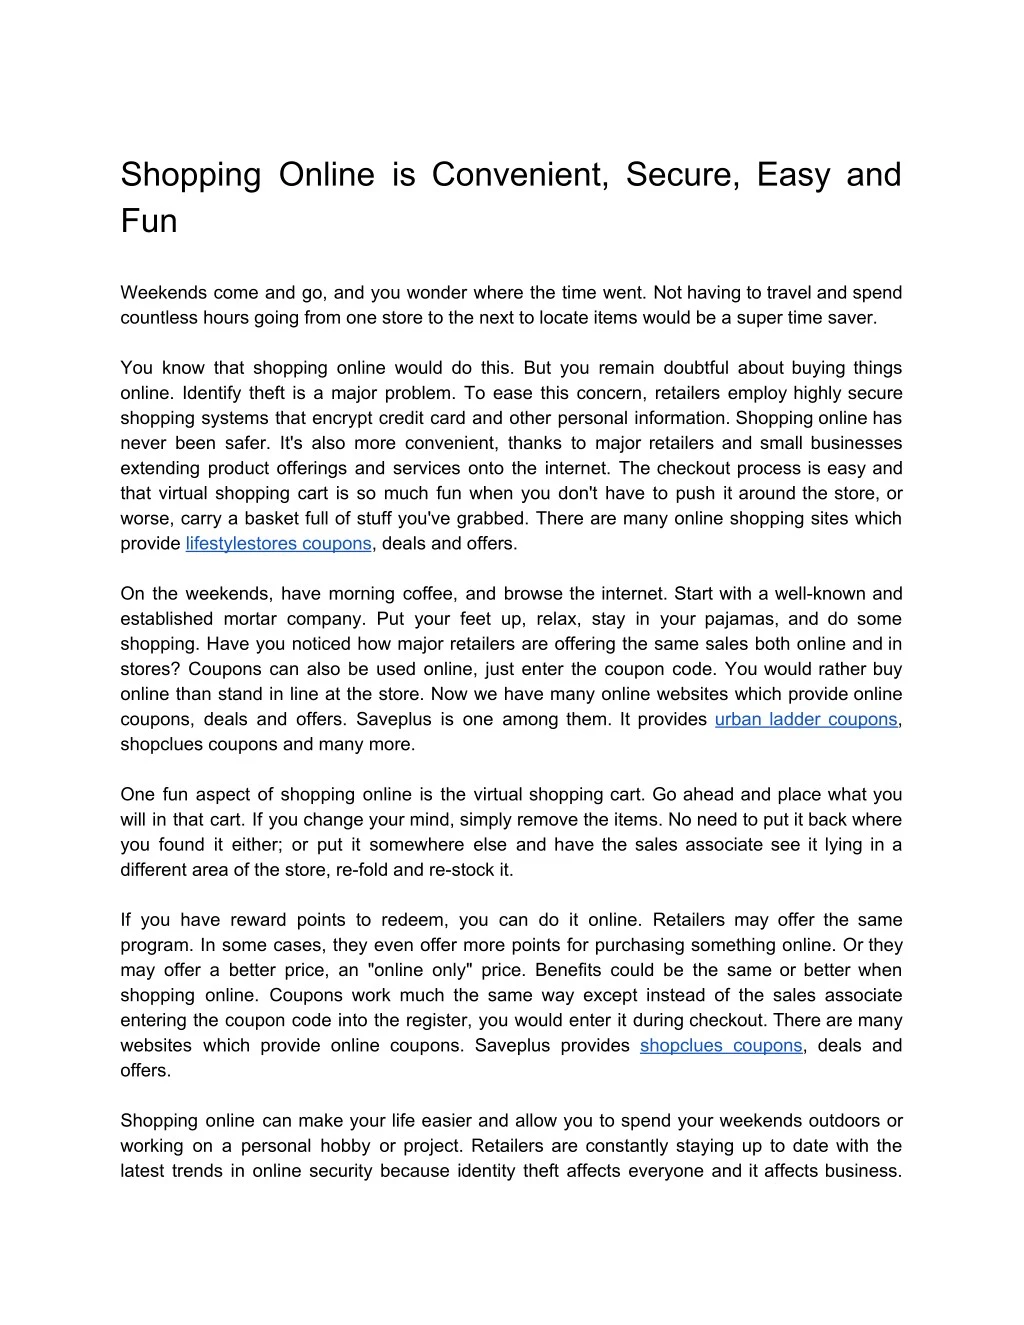 shopping online is convenient secure easy and fun